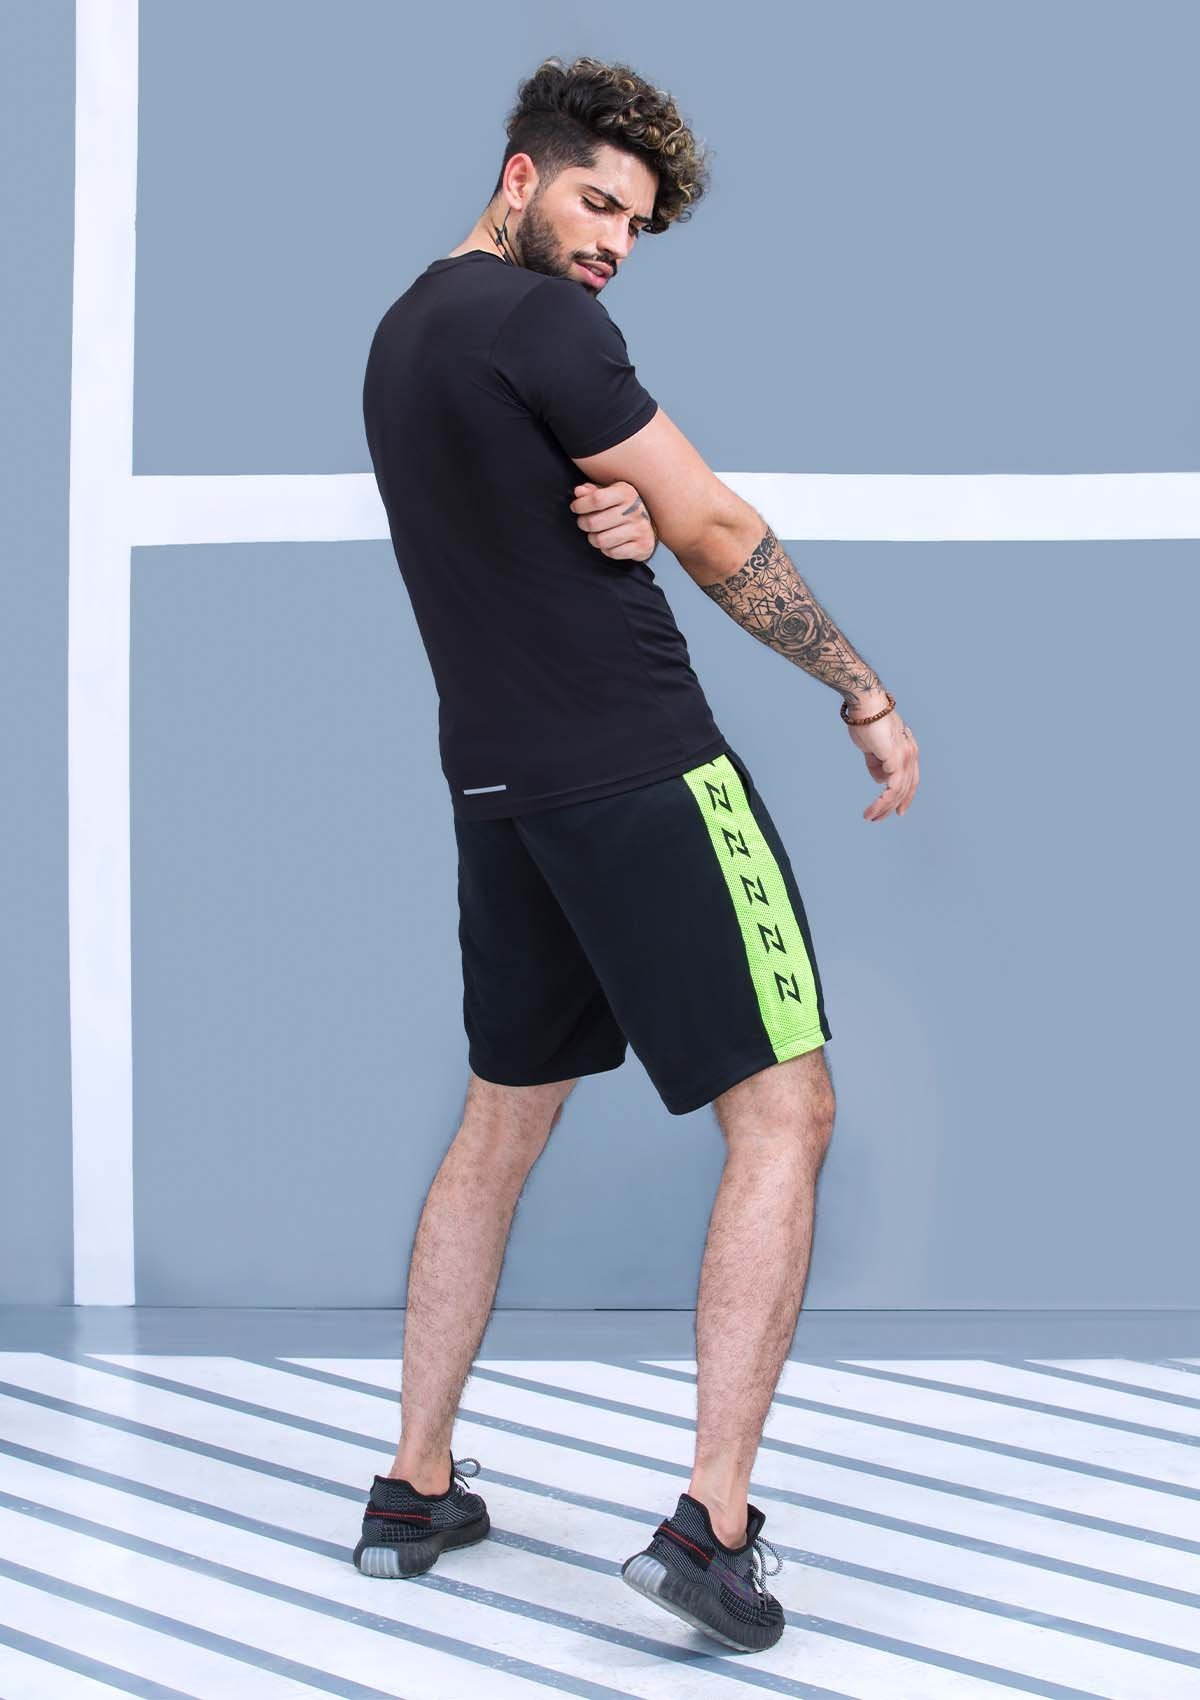 TRAINING SHORTS MESH - BLACK AND NEON GREEN - Nomad Apparel